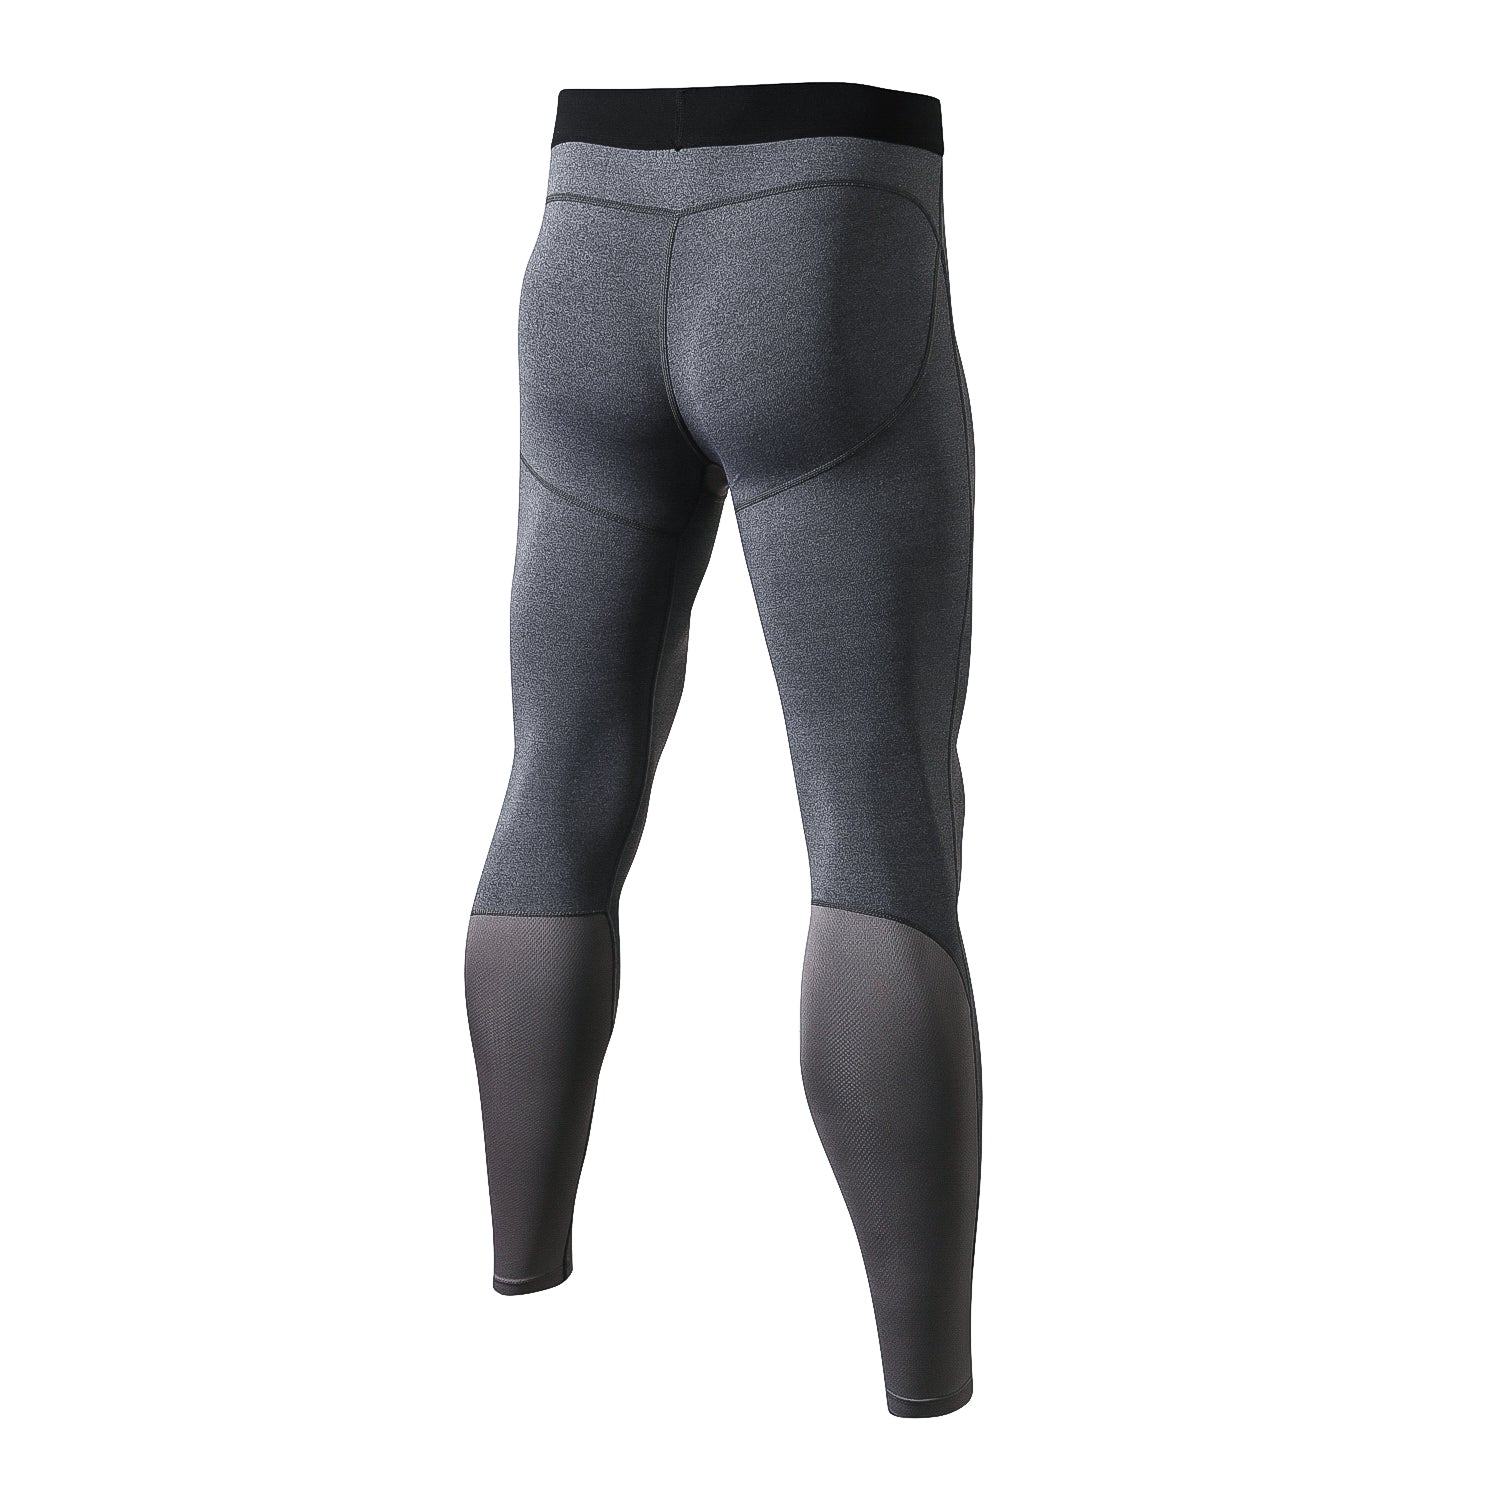 Frontwalk Mens Compression Pants High Waisted Leggings Cool Dry Tights  Running Athletic Sport Pant Elastic Waist Base Layer Gray M 